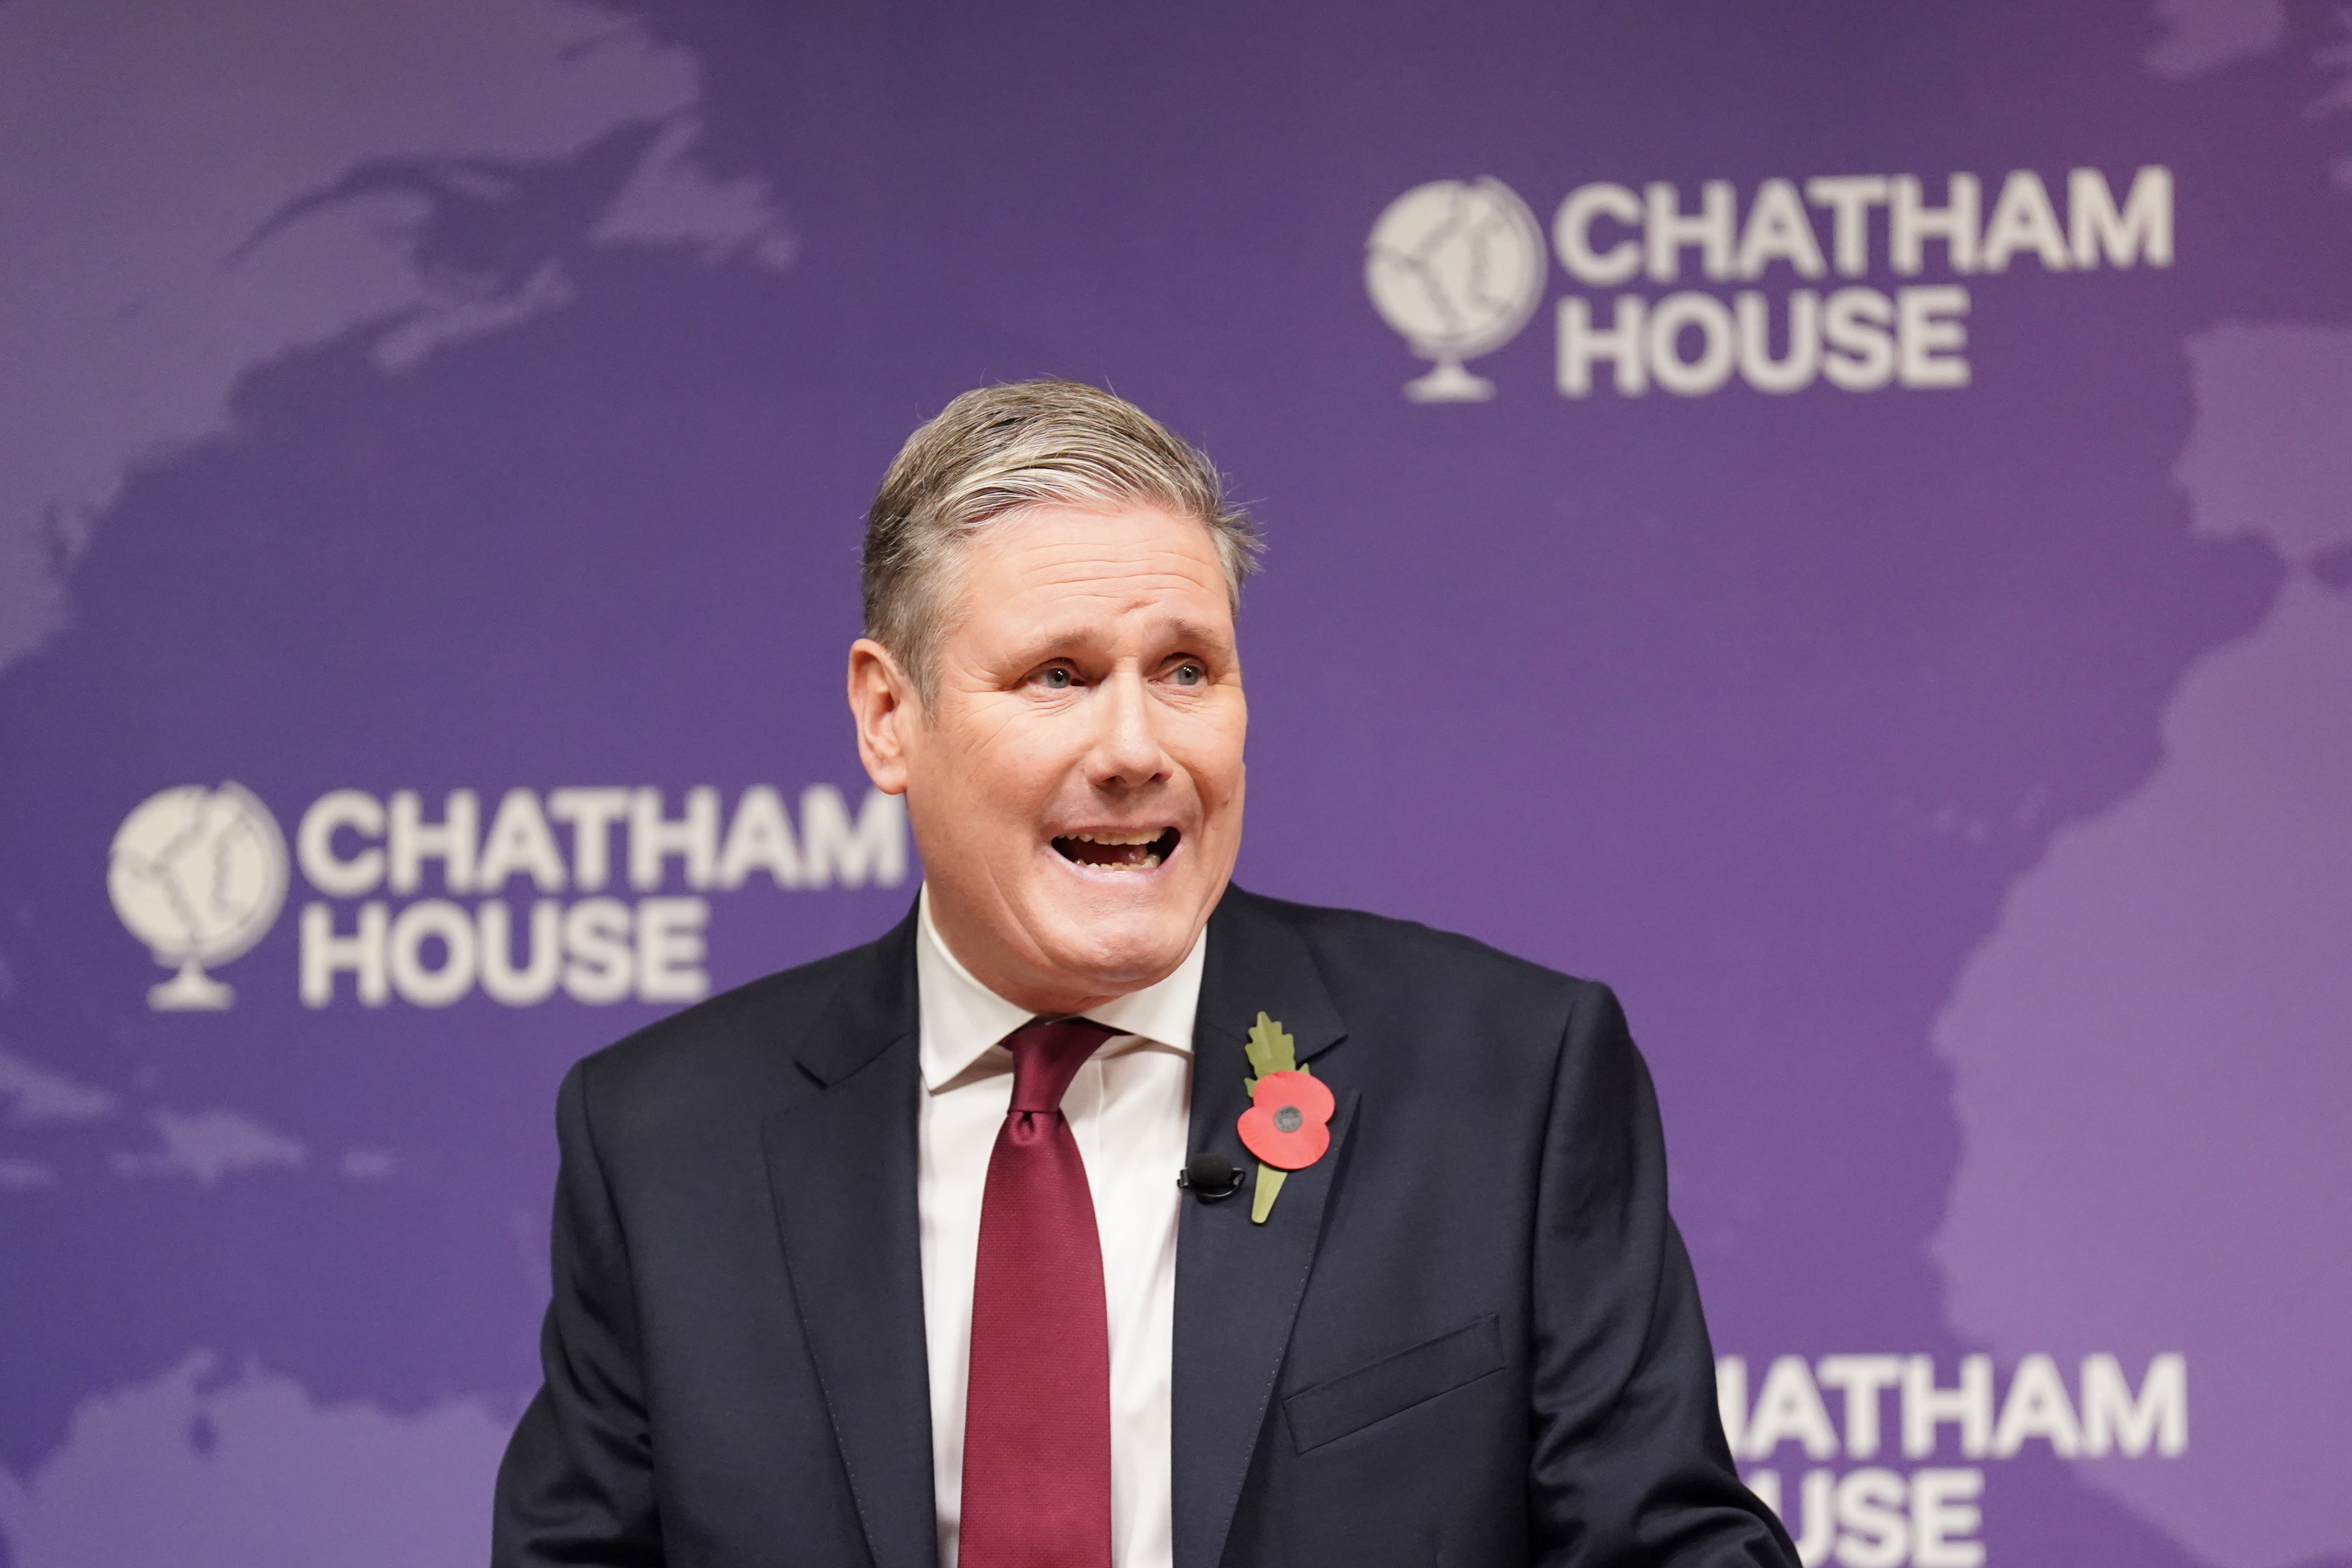 Keir Starmer has called for a ‘humanitarian pause’ in the Israel-Hamas conflict, but not a ceasefire